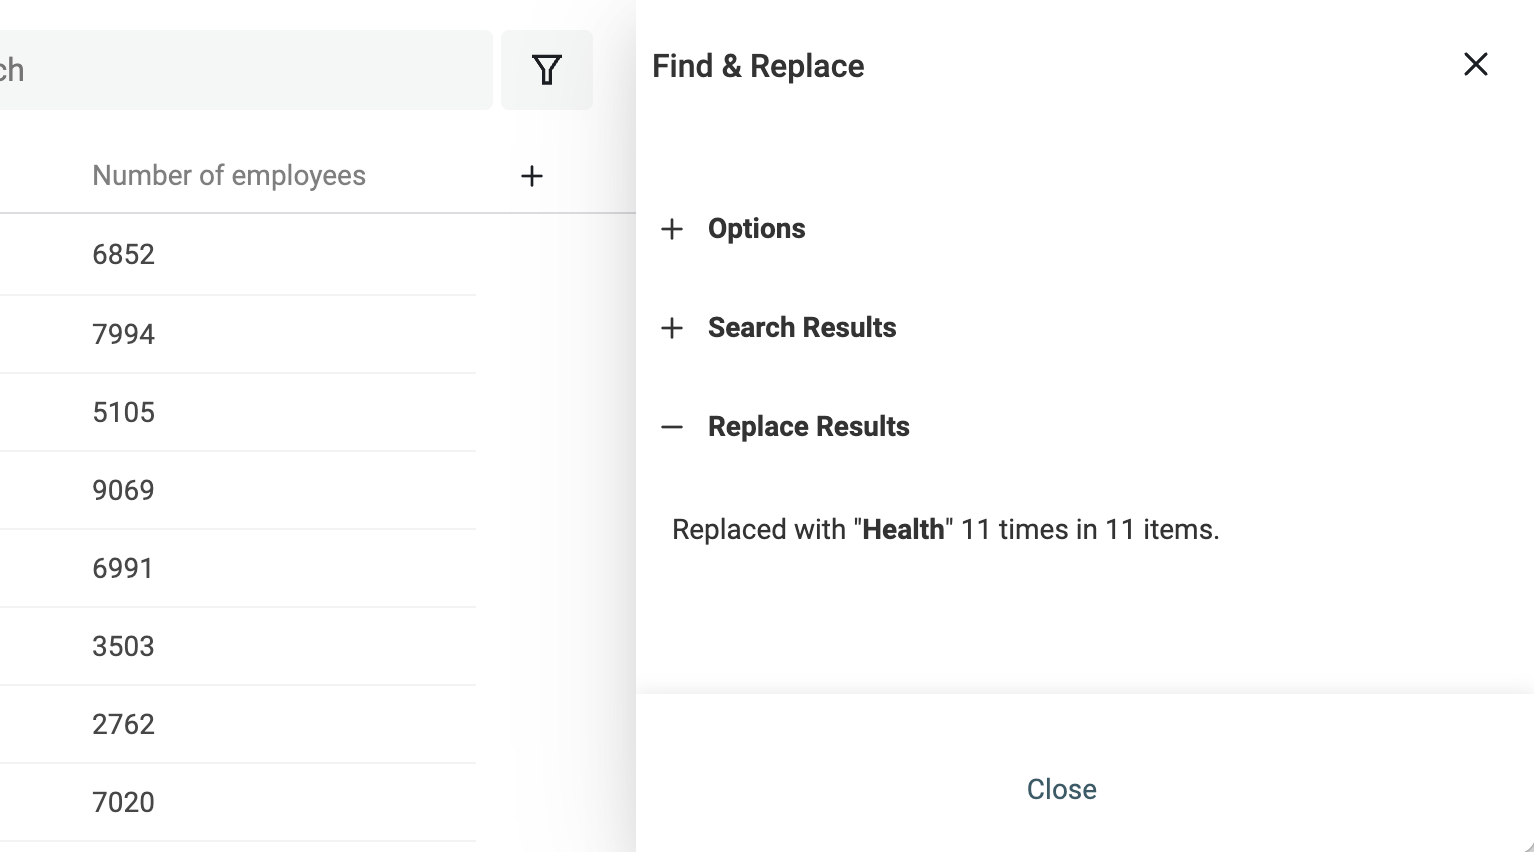 Find & Replace results